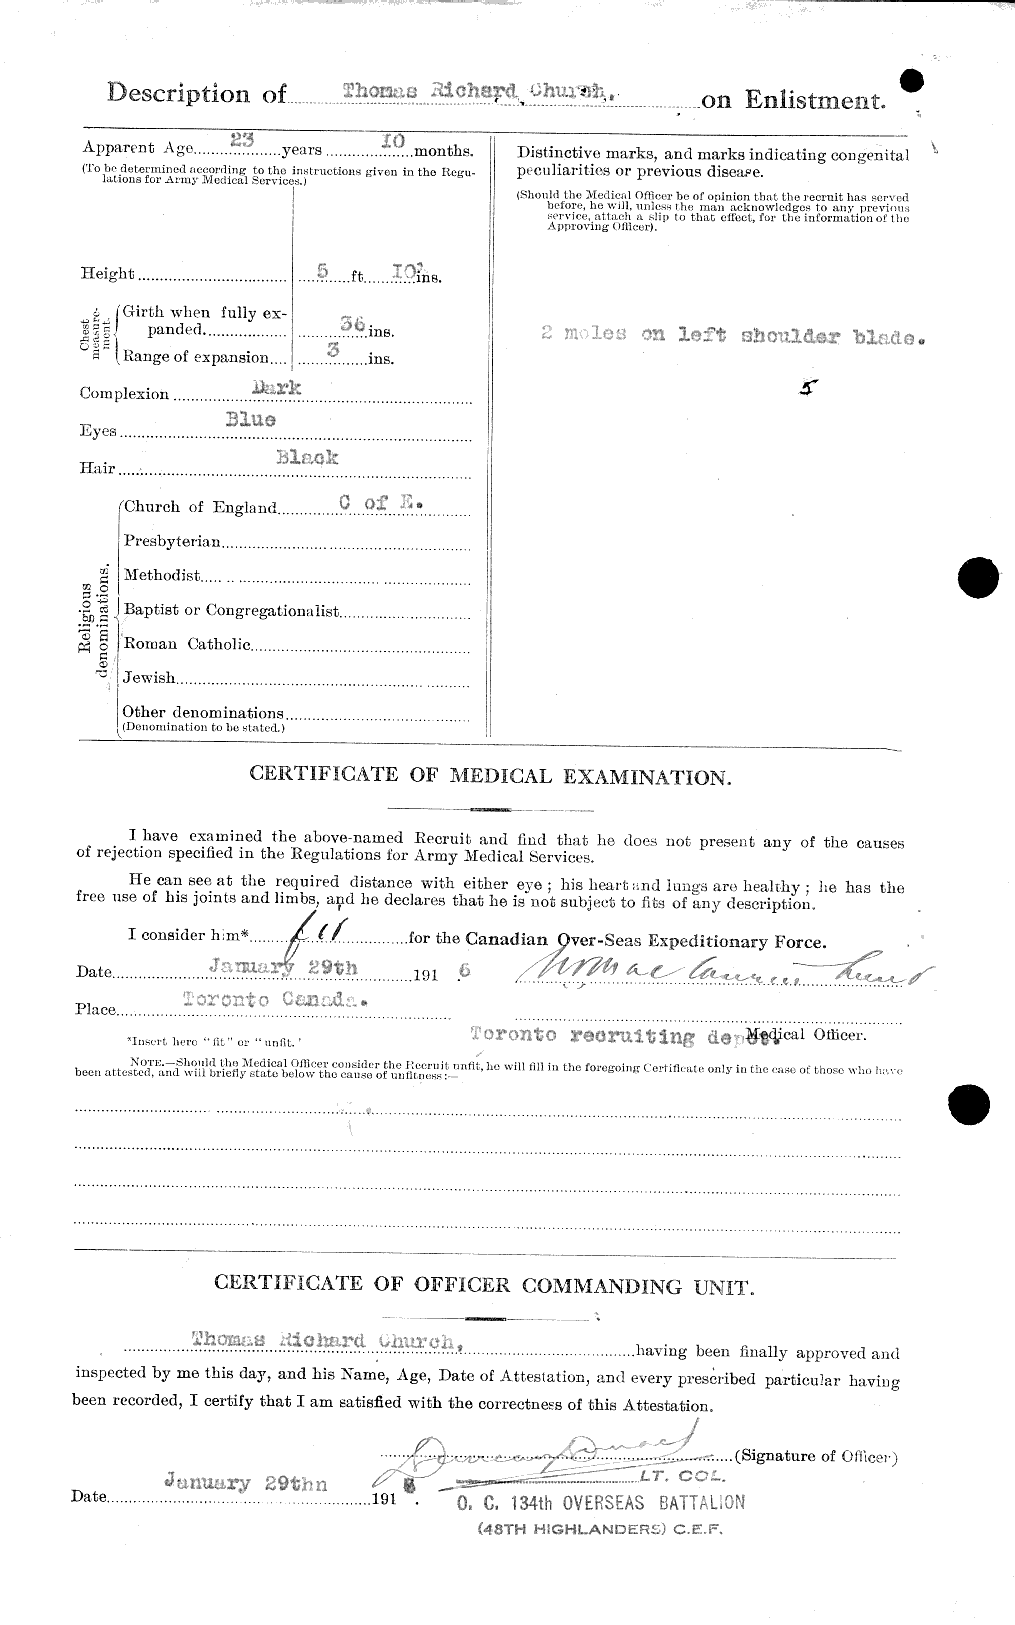 Personnel Records of the First World War - CEF 022385b